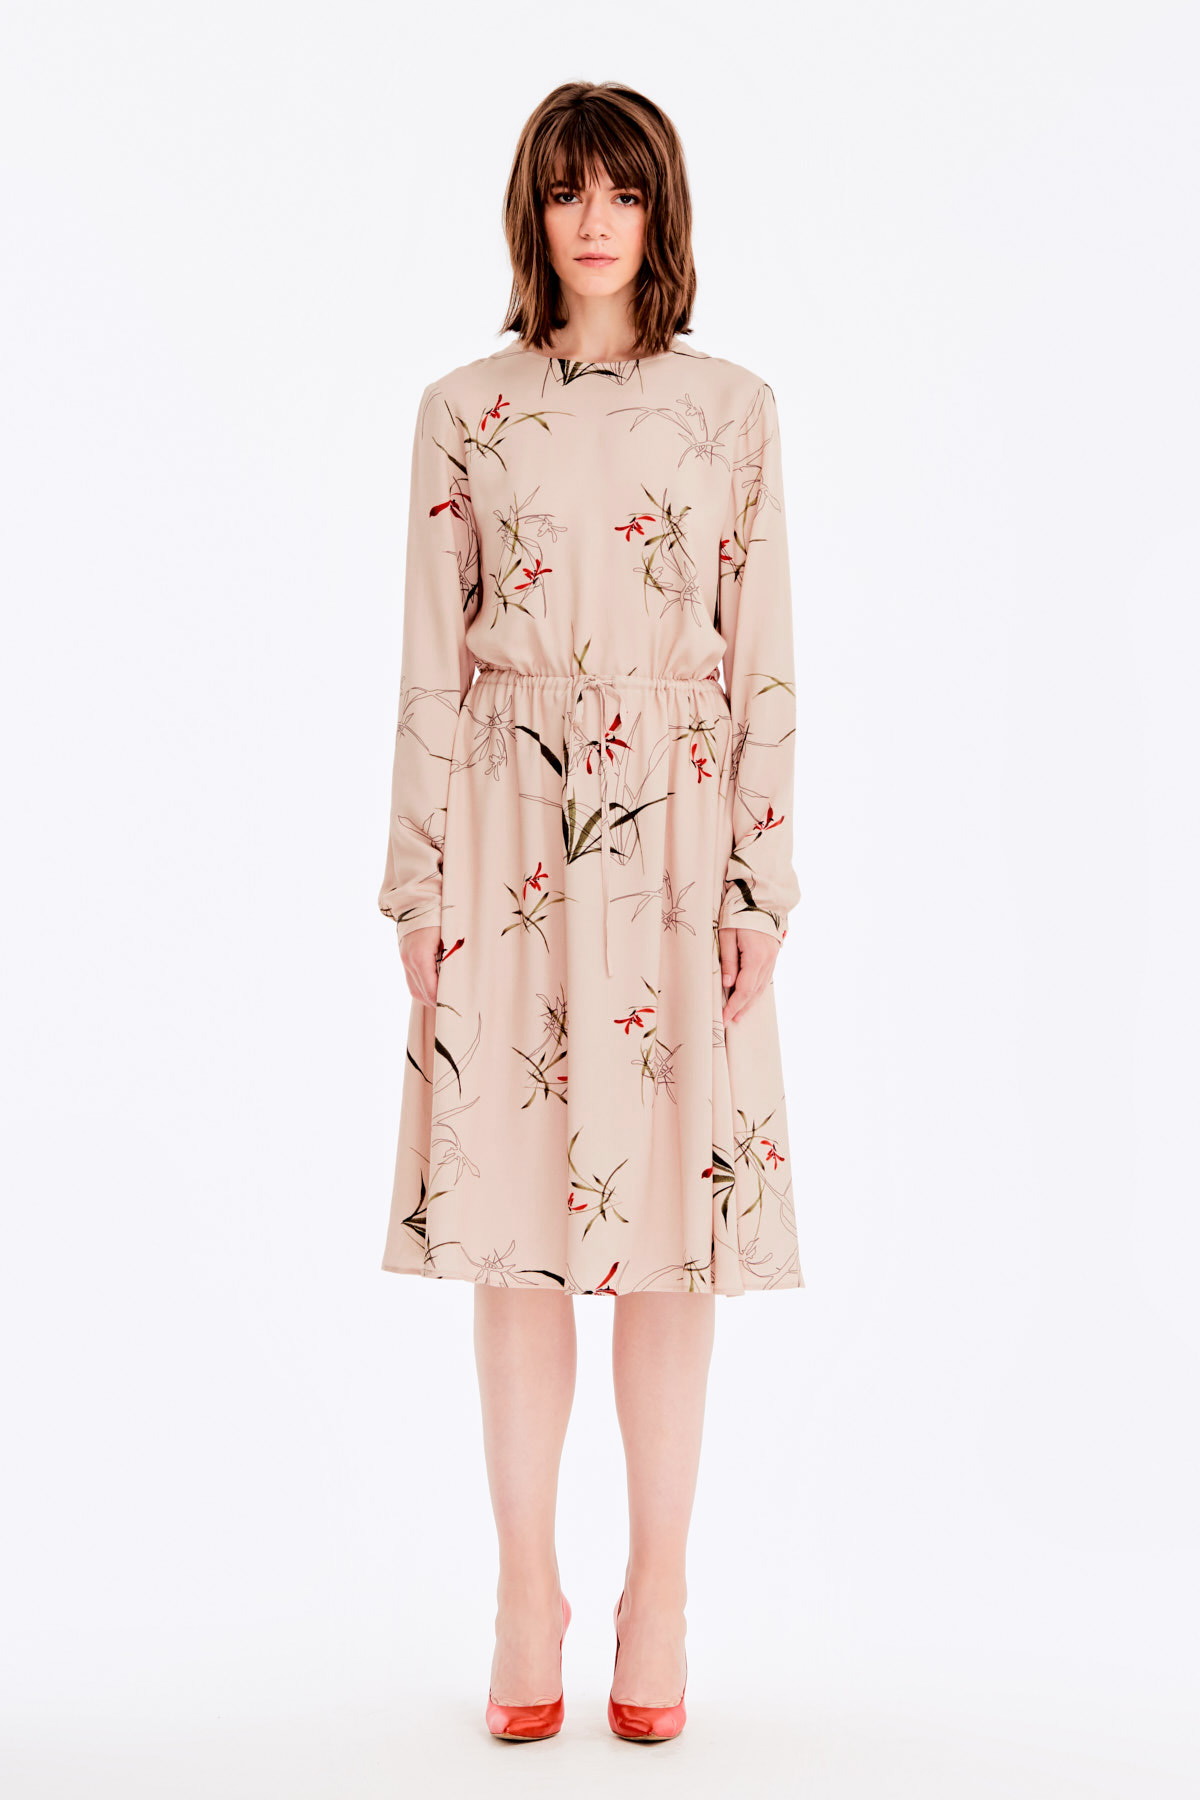 Beige dress with a floral print and ties, photo 3